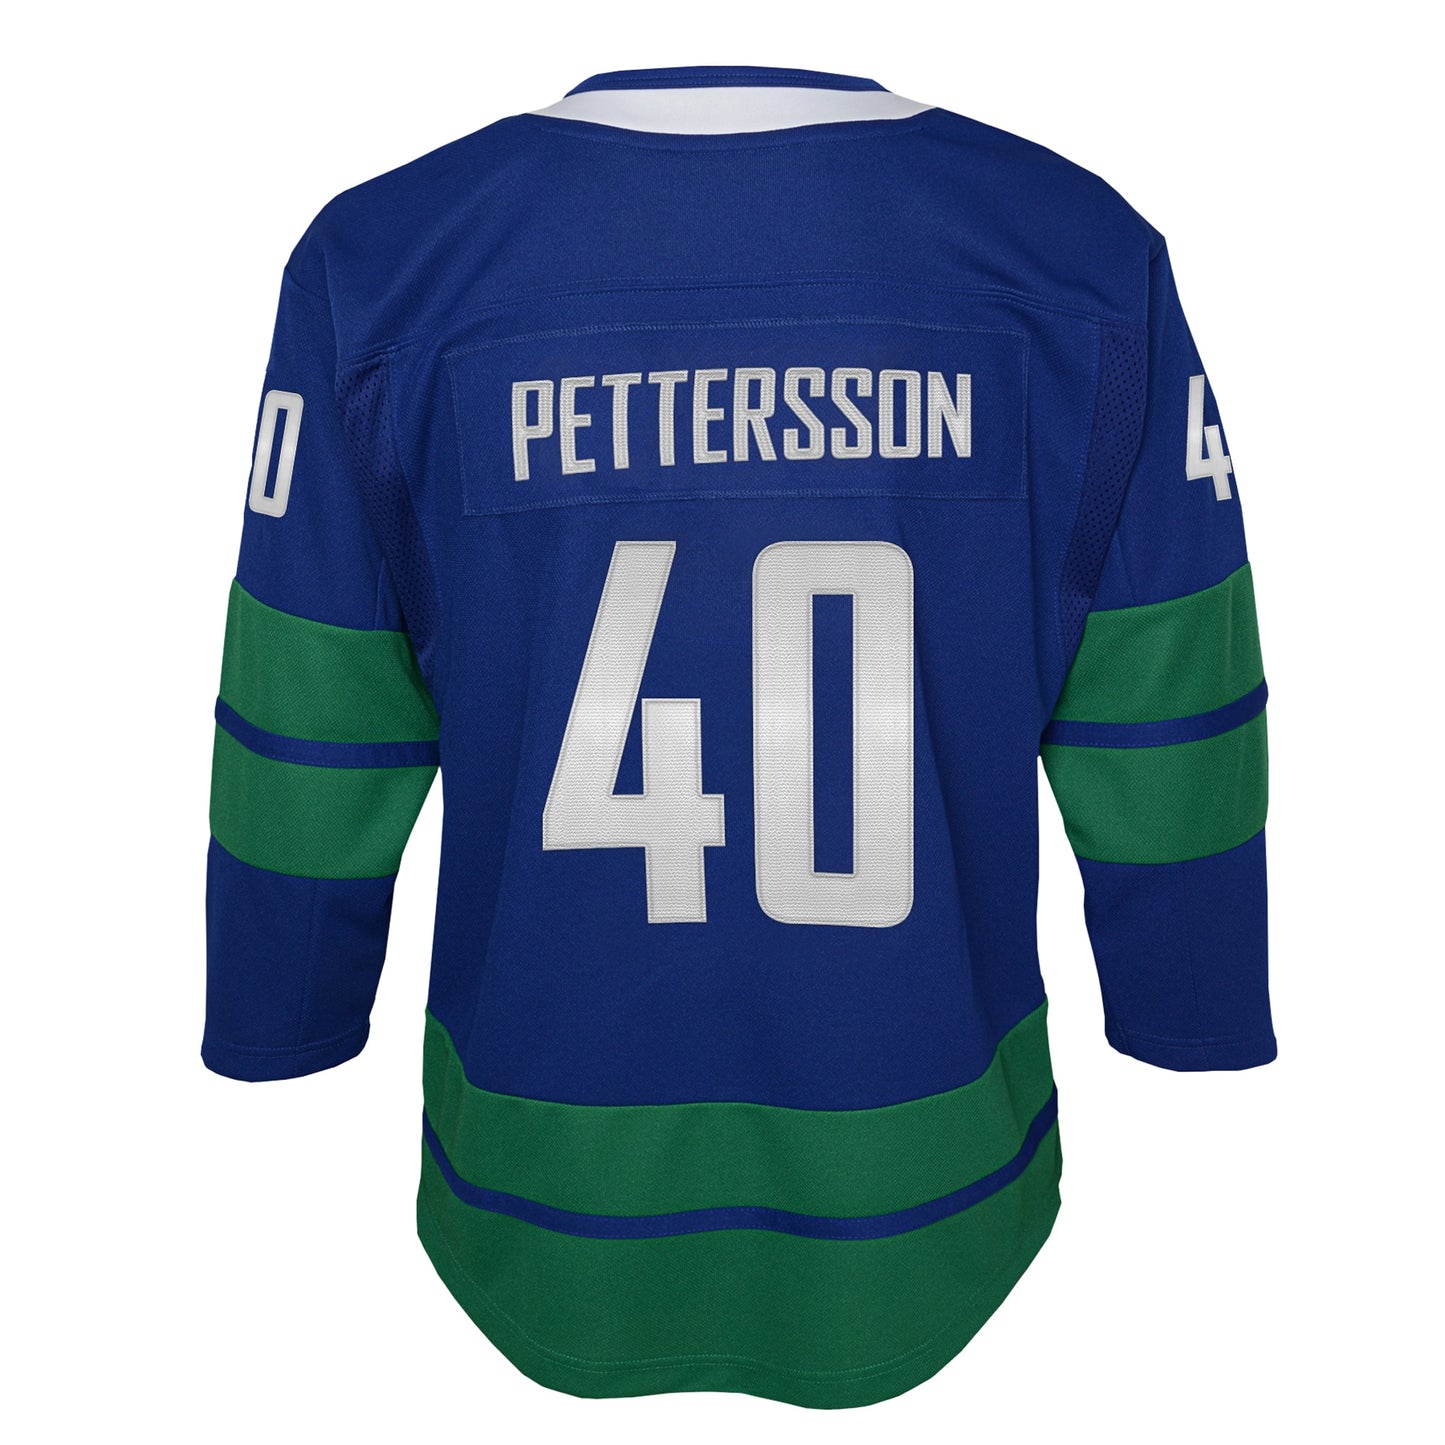 Elias Pettersson Vancouver Canucks Youth Royal 2019/20 Alternate Premier Player Jersey